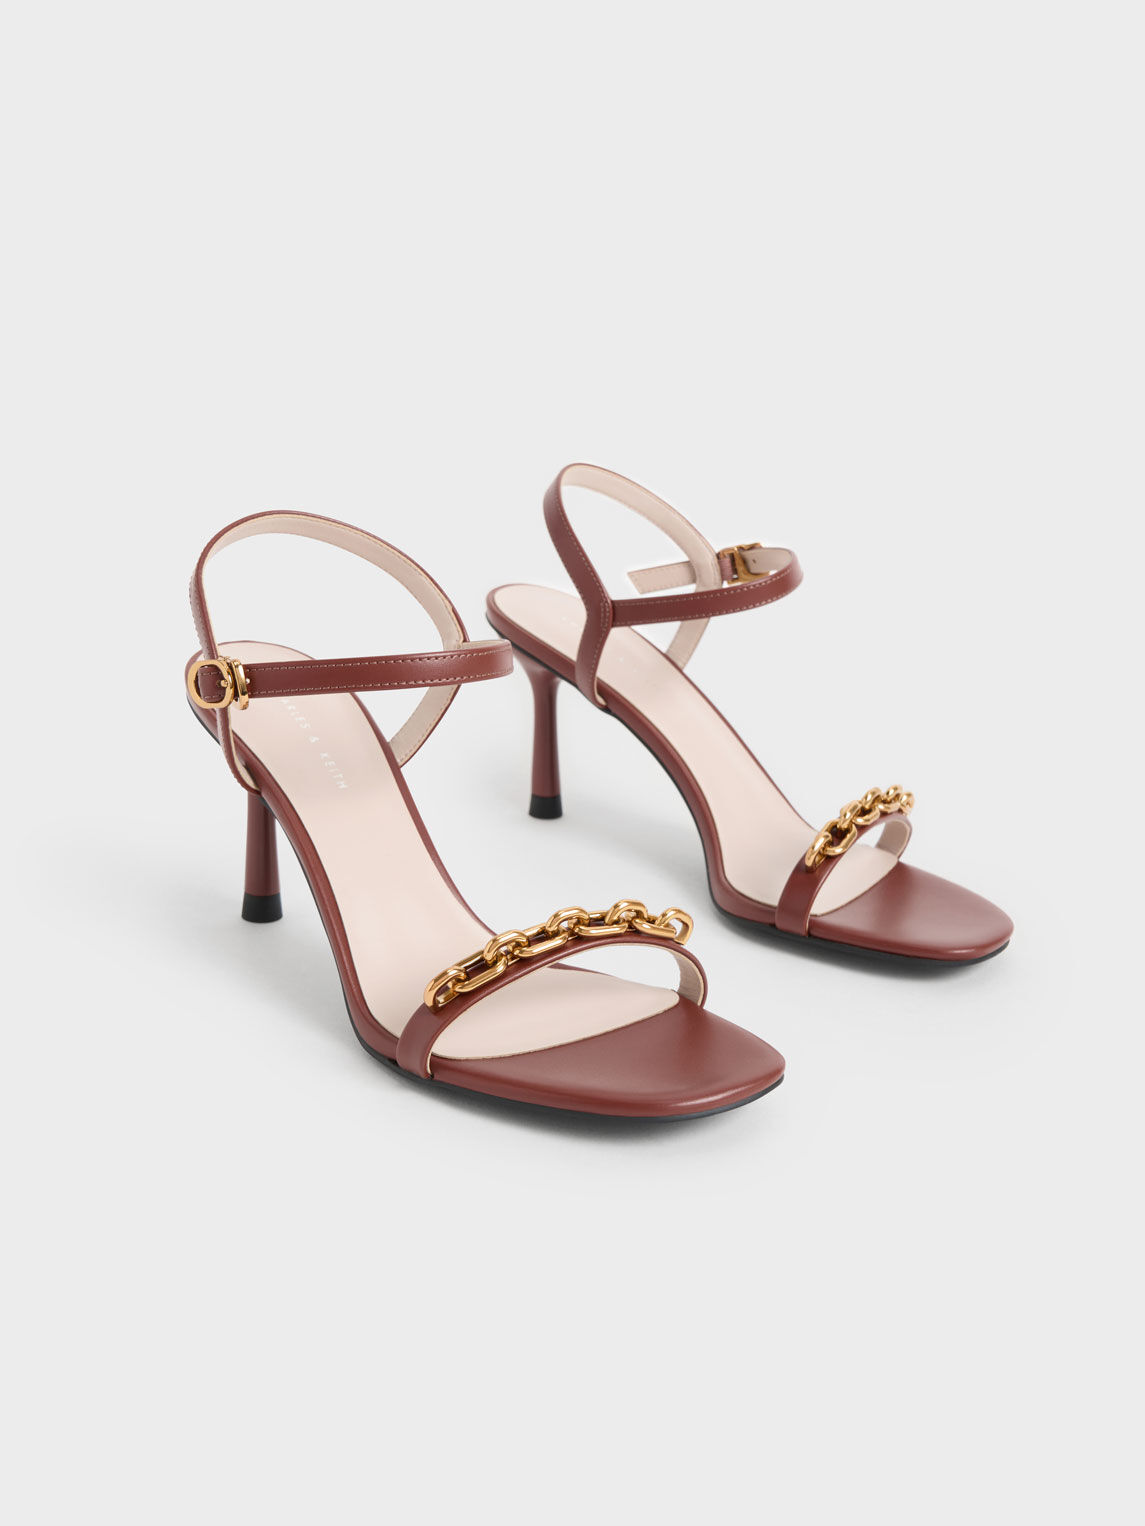 Chocolate Fondant Square Heeled Sandals With Straps 35 in Vegetal Tanned  Leather | LEMAIRE